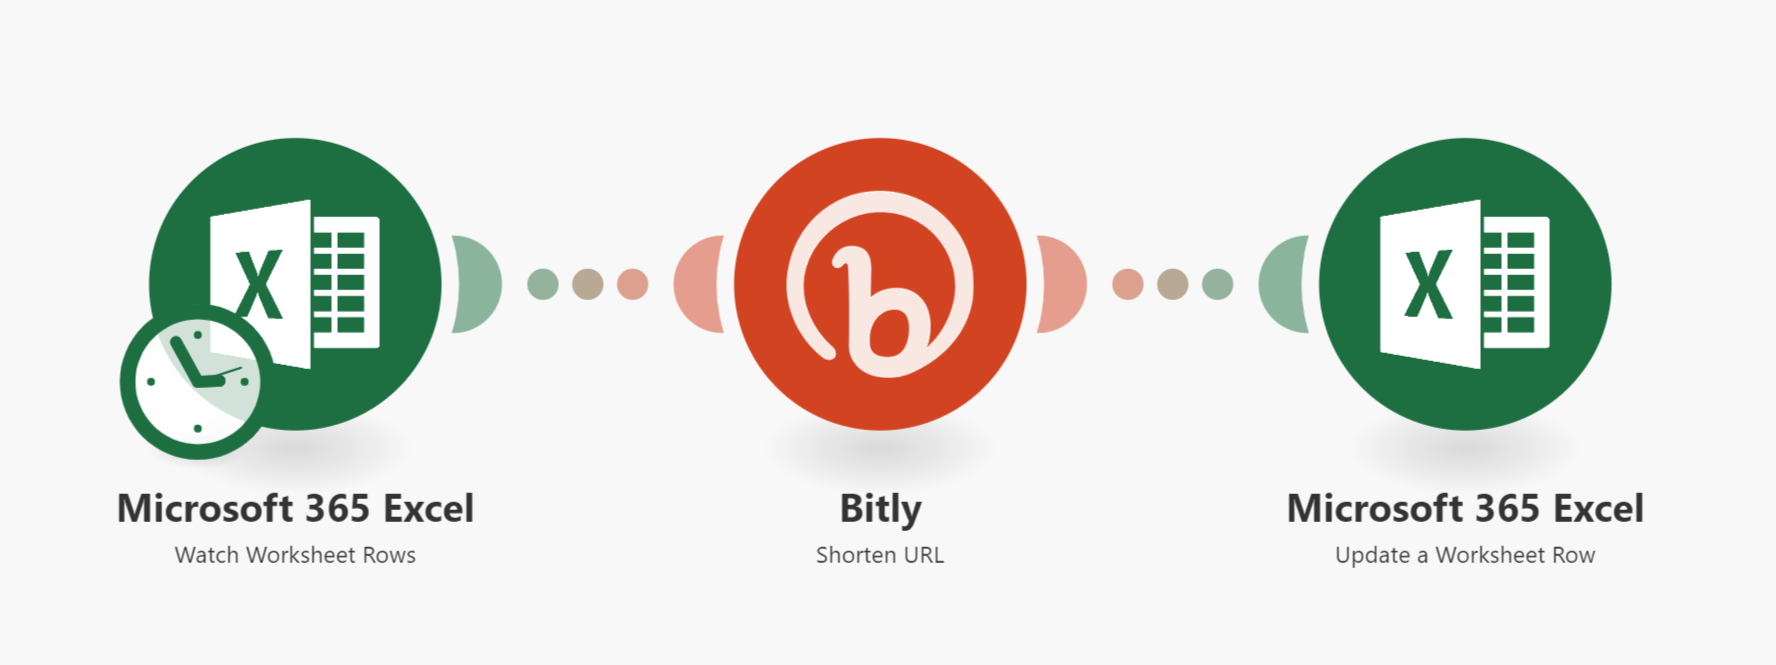 bilty-and-excel-automation-alt